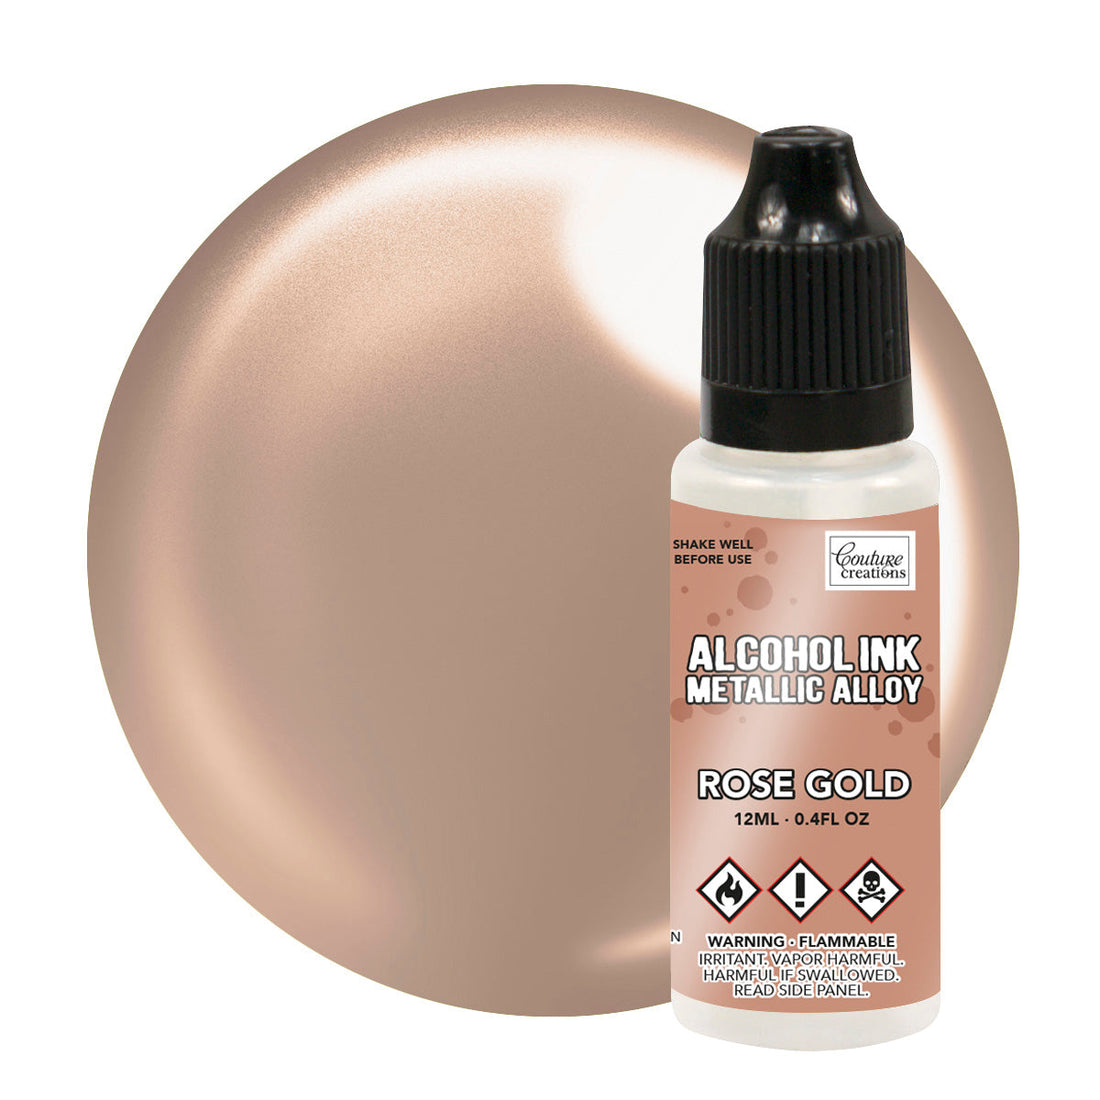 Couture Creations Alcohol Ink Metallic Alloy-Rose Gold